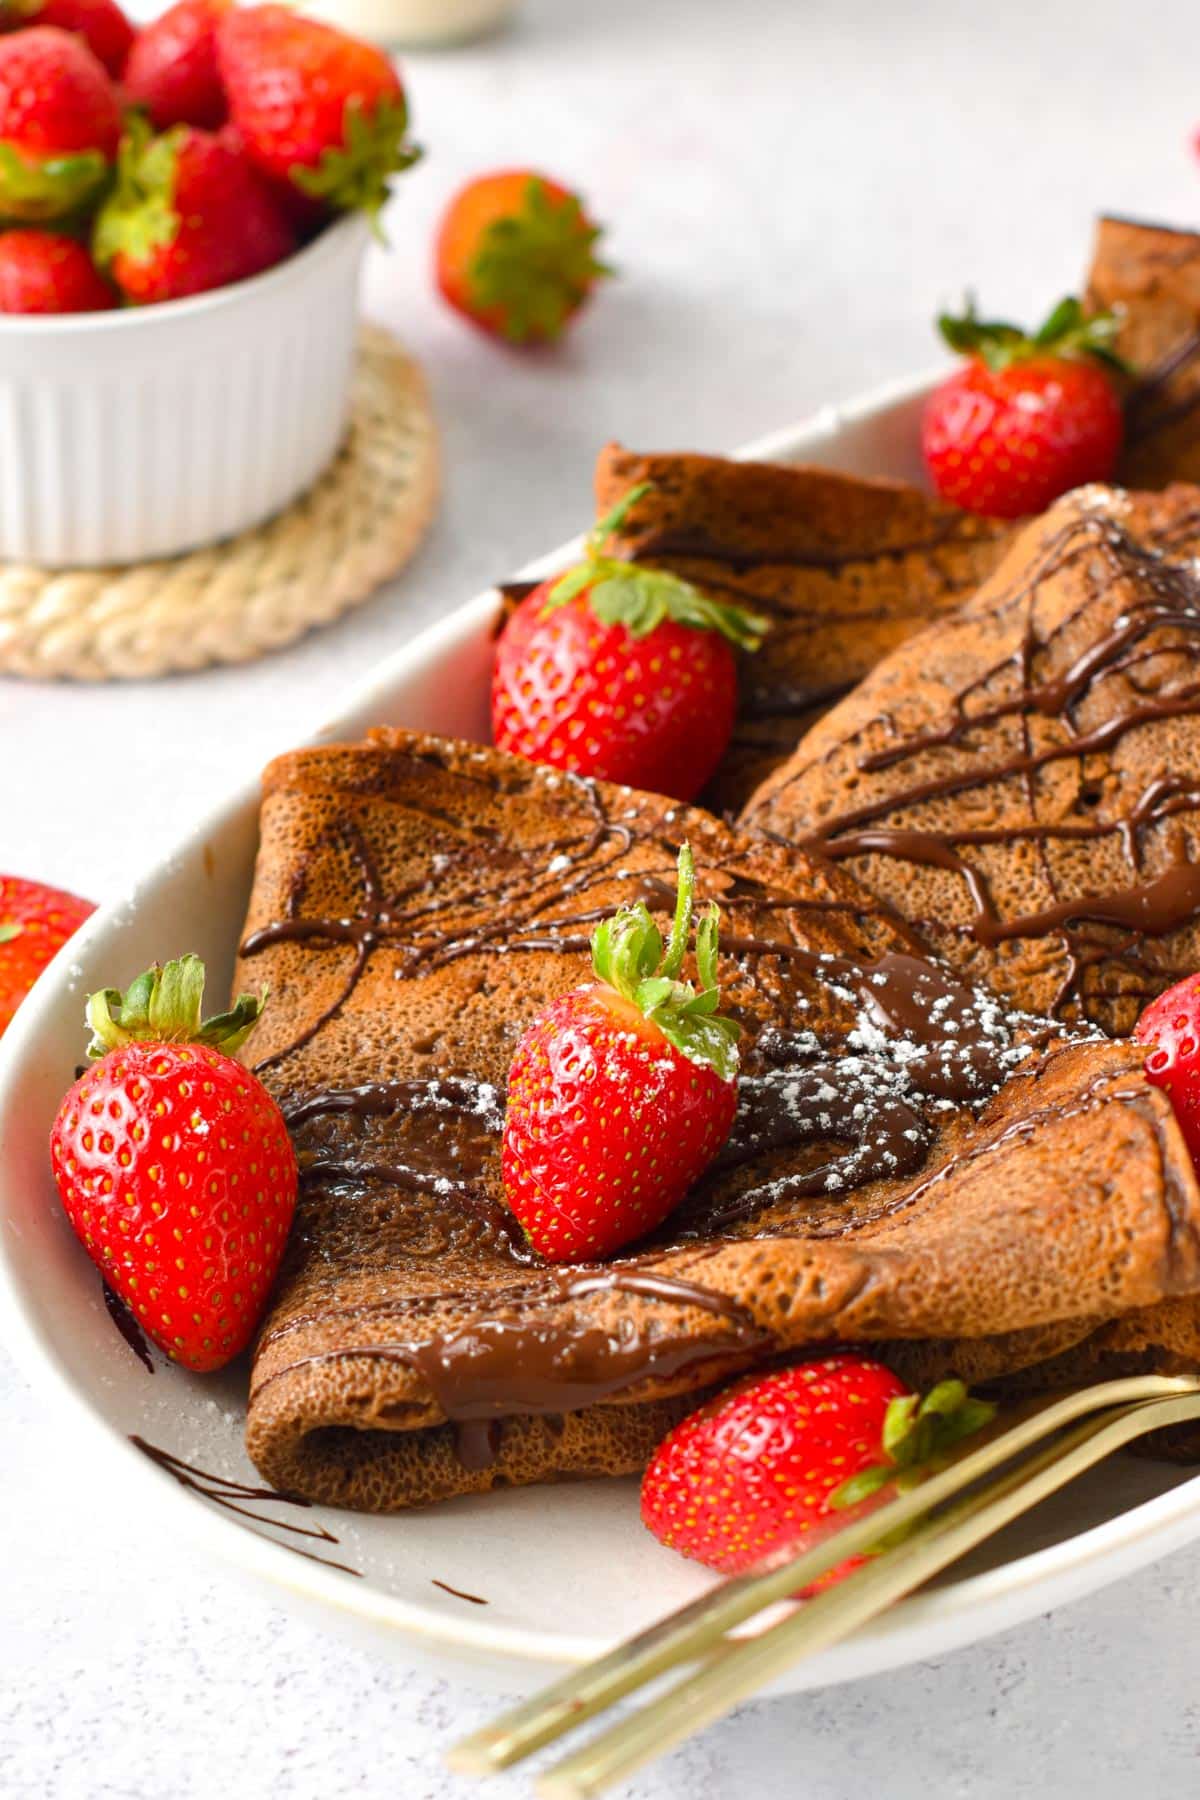 These Chocolate Crepes are thin chocolate French crepes perfect to fill with whipped cream, yogurt, or berries. It's an easy pancake recipe for breakfast or a delicious french dessert to impress.These Chocolate Crepes are thin chocolate French crepes perfect to fill with whipped cream, yogurt, or berries. It's an easy pancake recipe for breakfast or a delicious french dessert to impress.